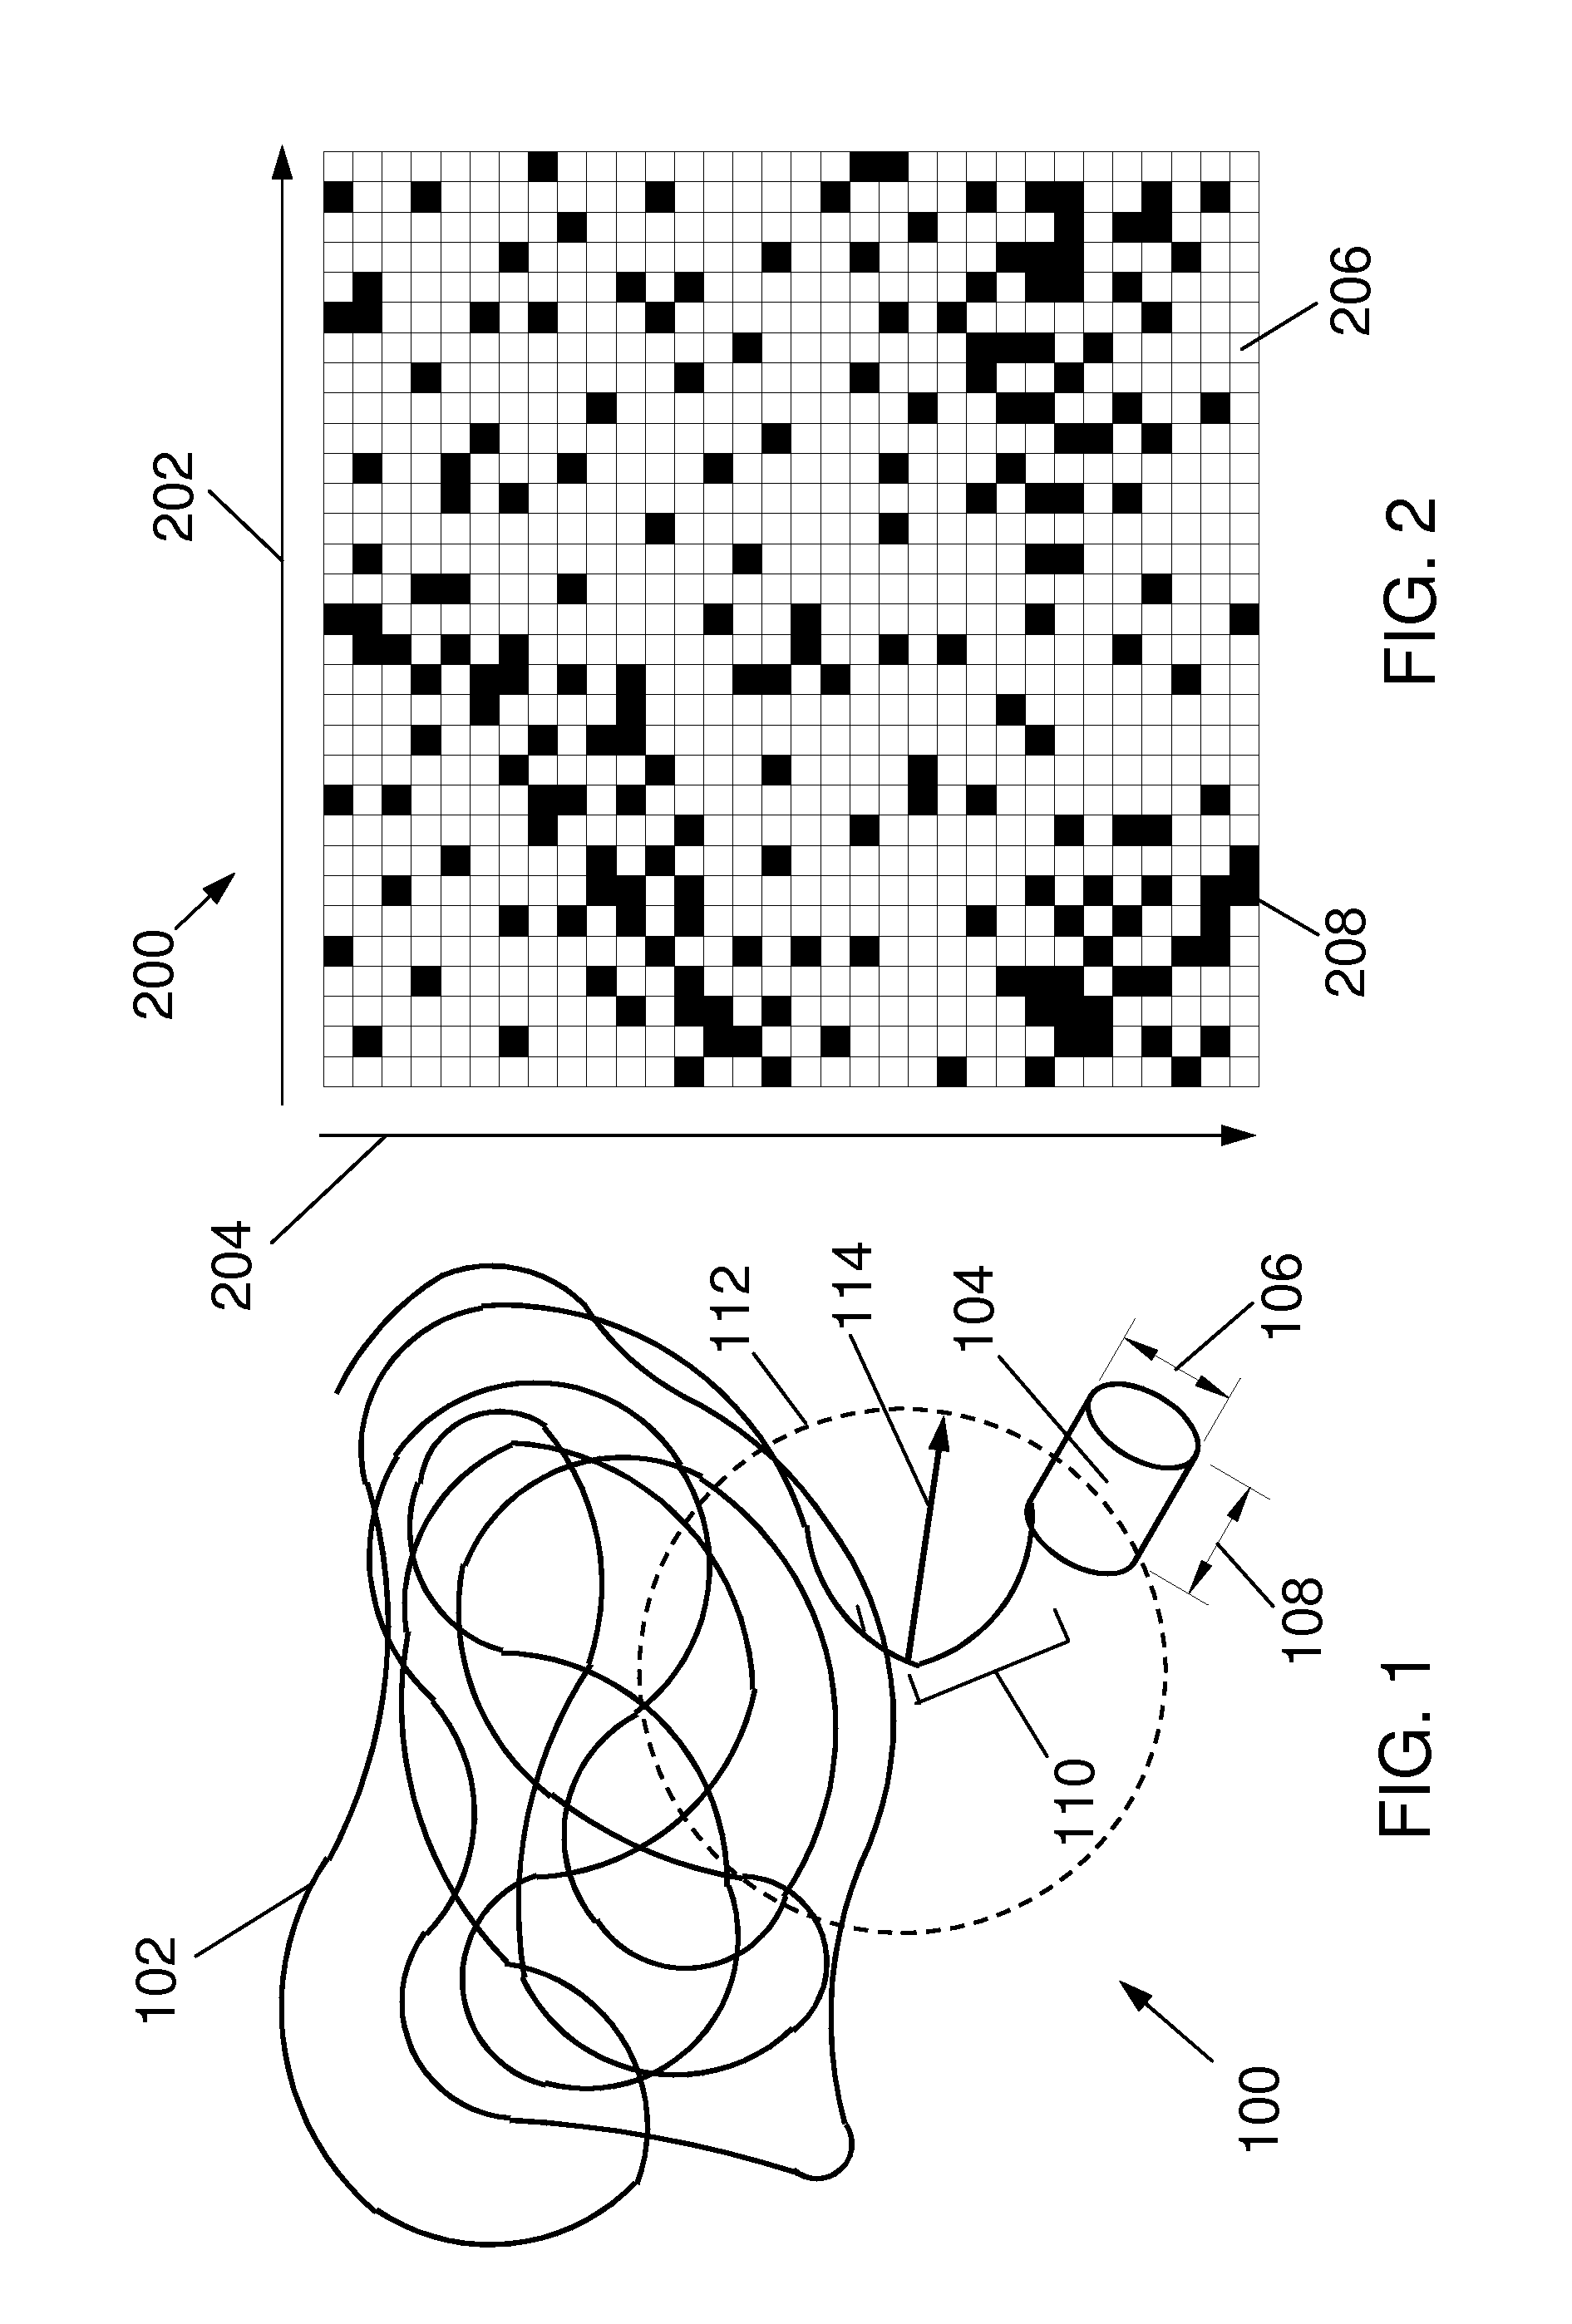 System and method for localization of large numbers of fluorescent markers in biological samples